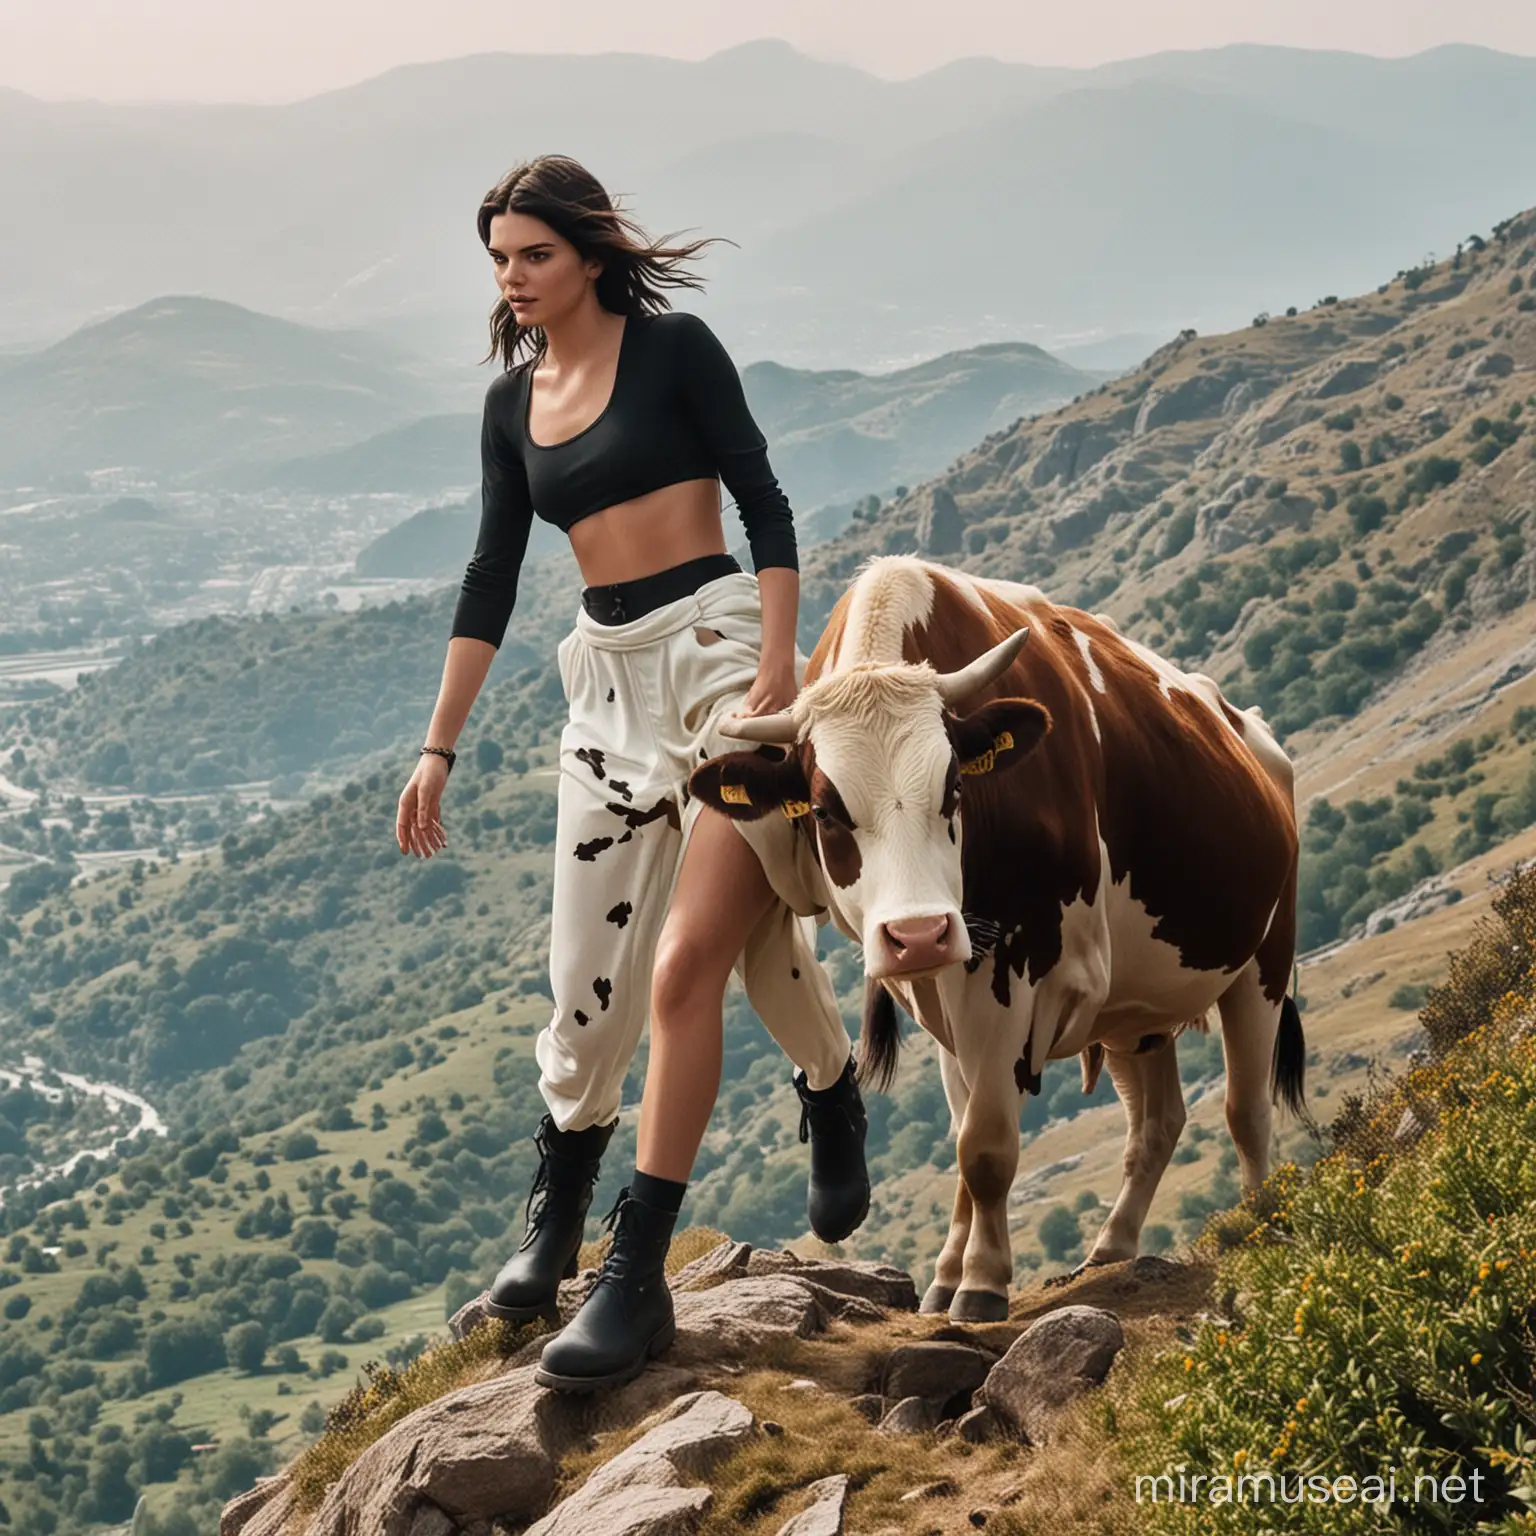 Kendall Jenner Climbing Mountain in Cow Print Attire